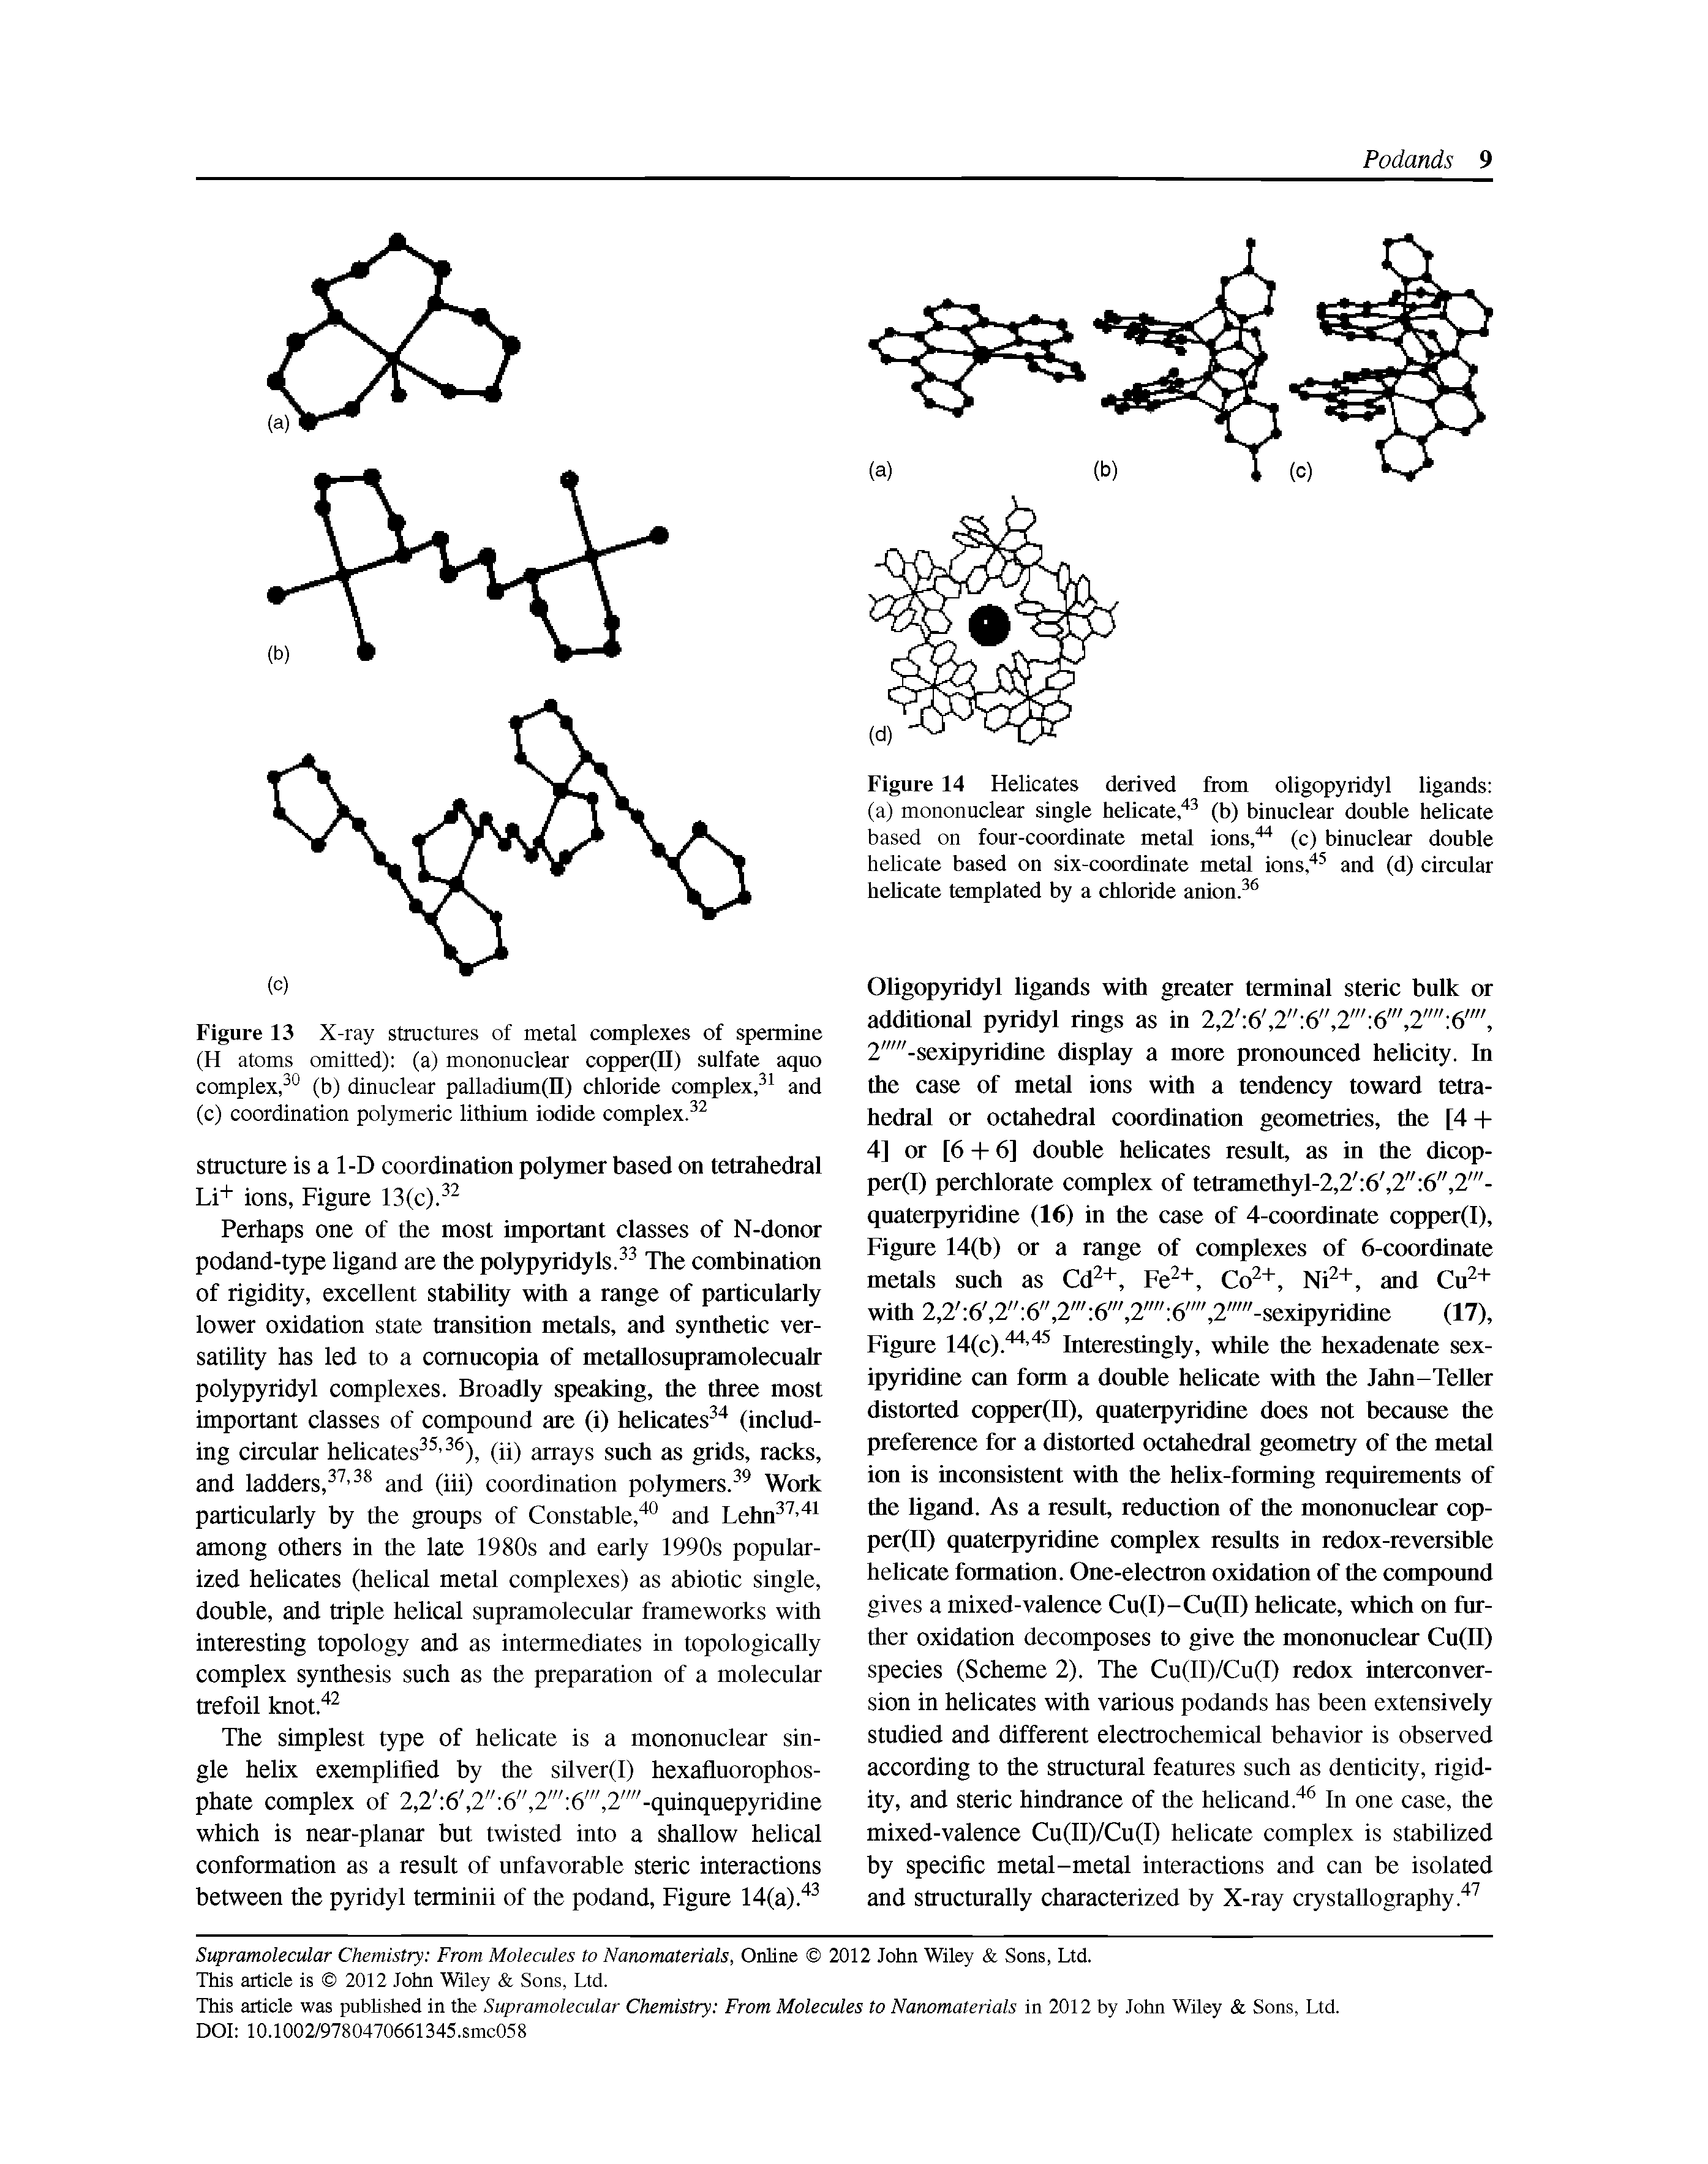 Figure 14(c)." " Interestingly, while the hexadenate sex-ipyridine can form a double helicate with the Jahn-Teller distorted copper(II), quaterpyridine does not because the preference for a distorted octahedral geometry of the metal ion is inconsistent with the helix-forming requirements of the ligand. As a result, reduction of the mononuclear cop-per(n) quaterpyridine complex results in redox-reversible helicate formation. One-electron oxidation of the compound gives a mixed-valence Cu(I)-Cu(ll) helicate, which on further oxidation decomposes to give the mononuclear Cu(II) species (Scheme 2). The Cu(II)/Cu(I) redox interconversion in helicates with various podands has been extensively studied and different electrochemical behavior is observed according to the structural feamres such as denticity, rigidity, and steric hindrance of the helicand. In one case, the mixed-valence Cu(II)/Cu(I) helicate complex is stabilized by specific metal-metal interactions and can be isolated and structurally characterized by X-ray crystallography. ...